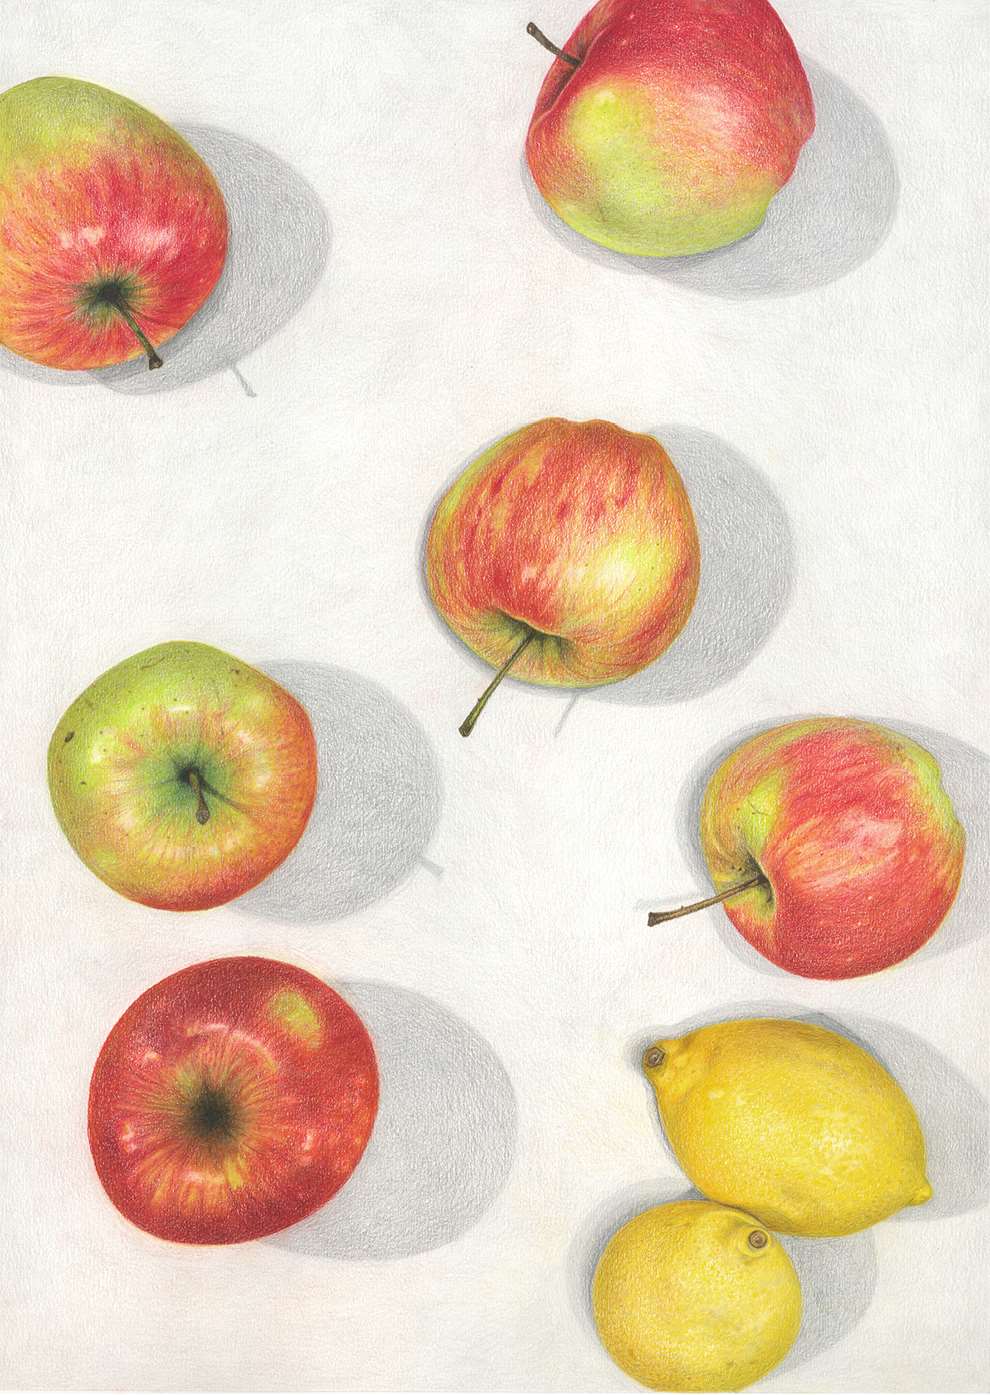 Pencil on Paper, Hand-drawn with pencils and colouring pencils, a staged scene of apples on a table.